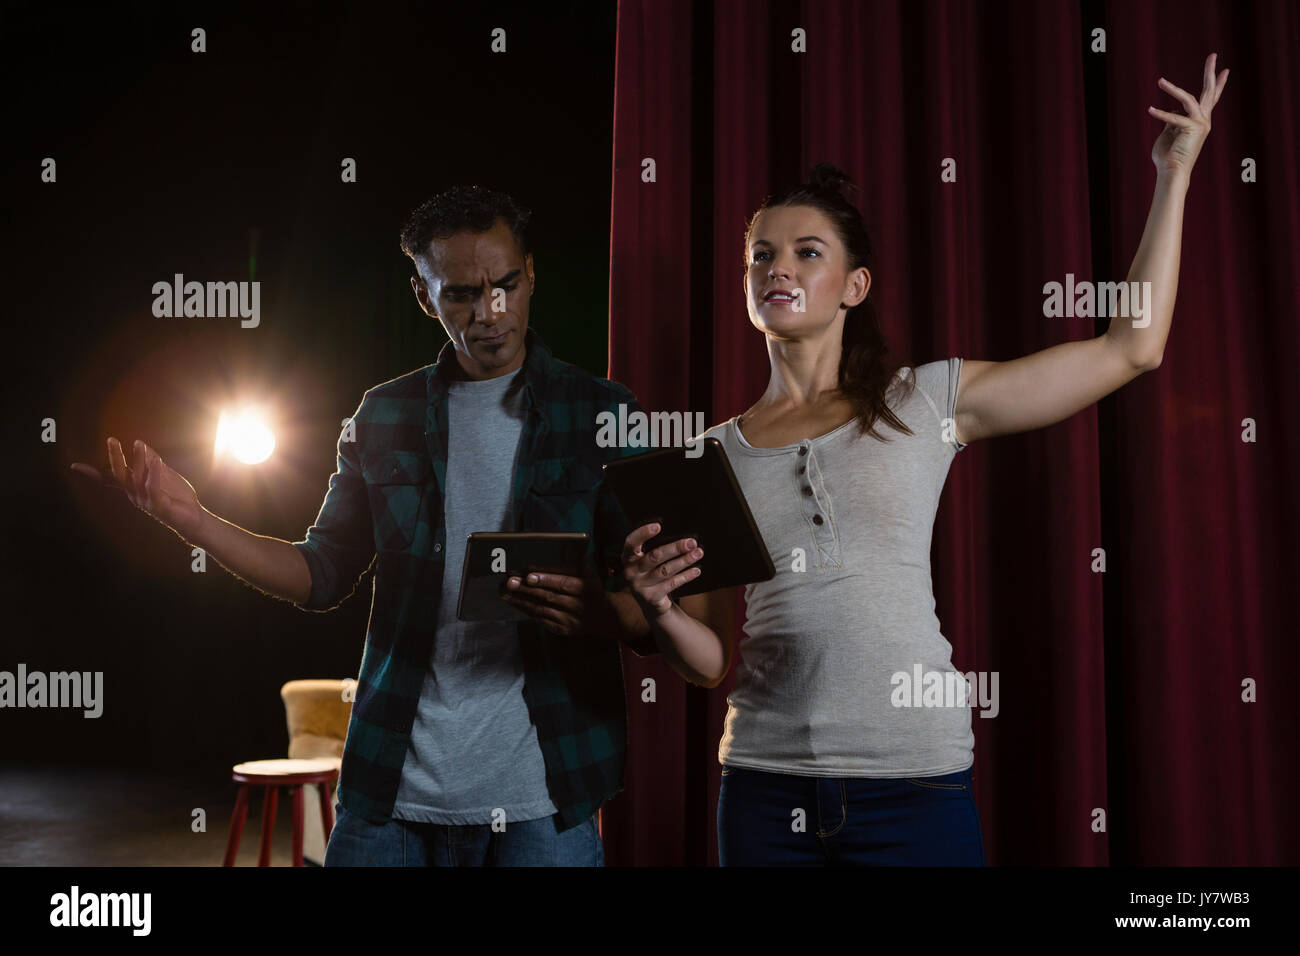 Actors rehearsing on stage while using digital tablet in theatre Stock Photo